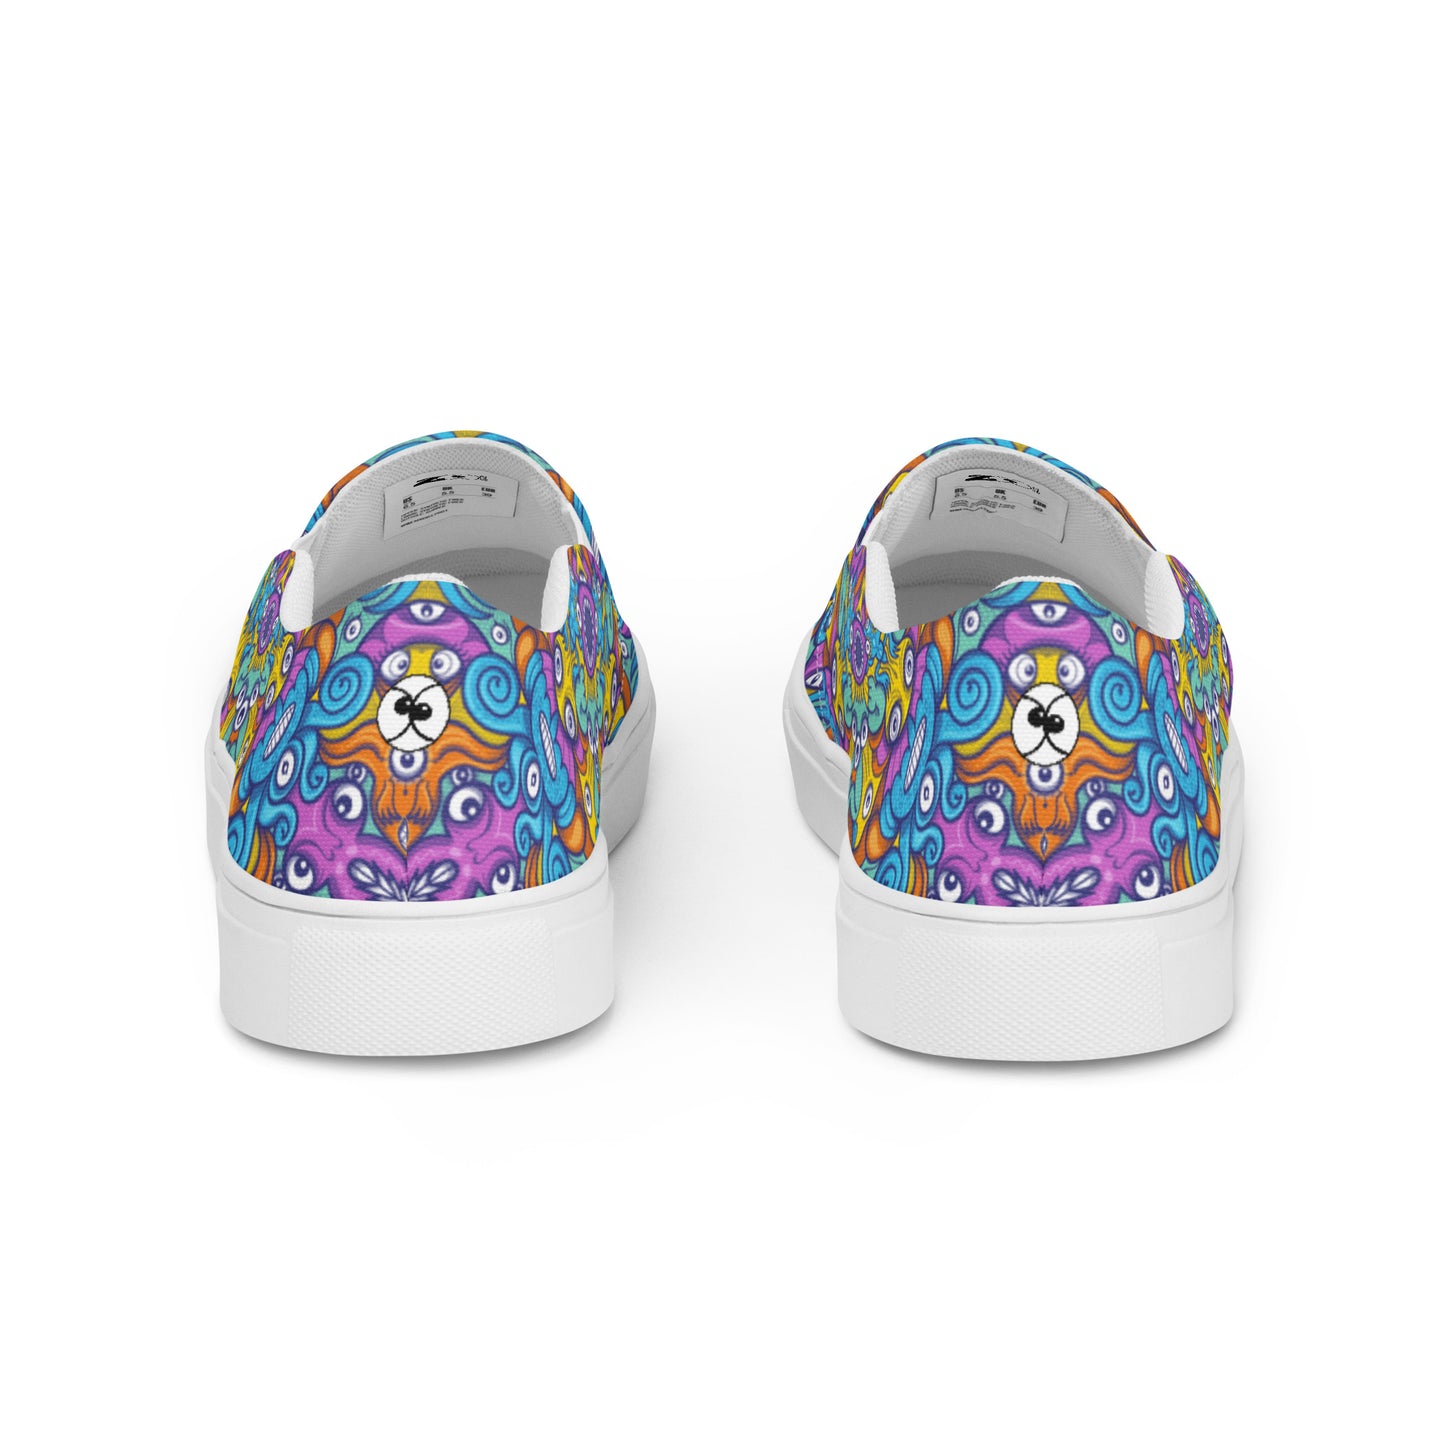 The ultimate sea beasts cast from the deep end of the ocean Men’s slip-on canvas shoes. Back view